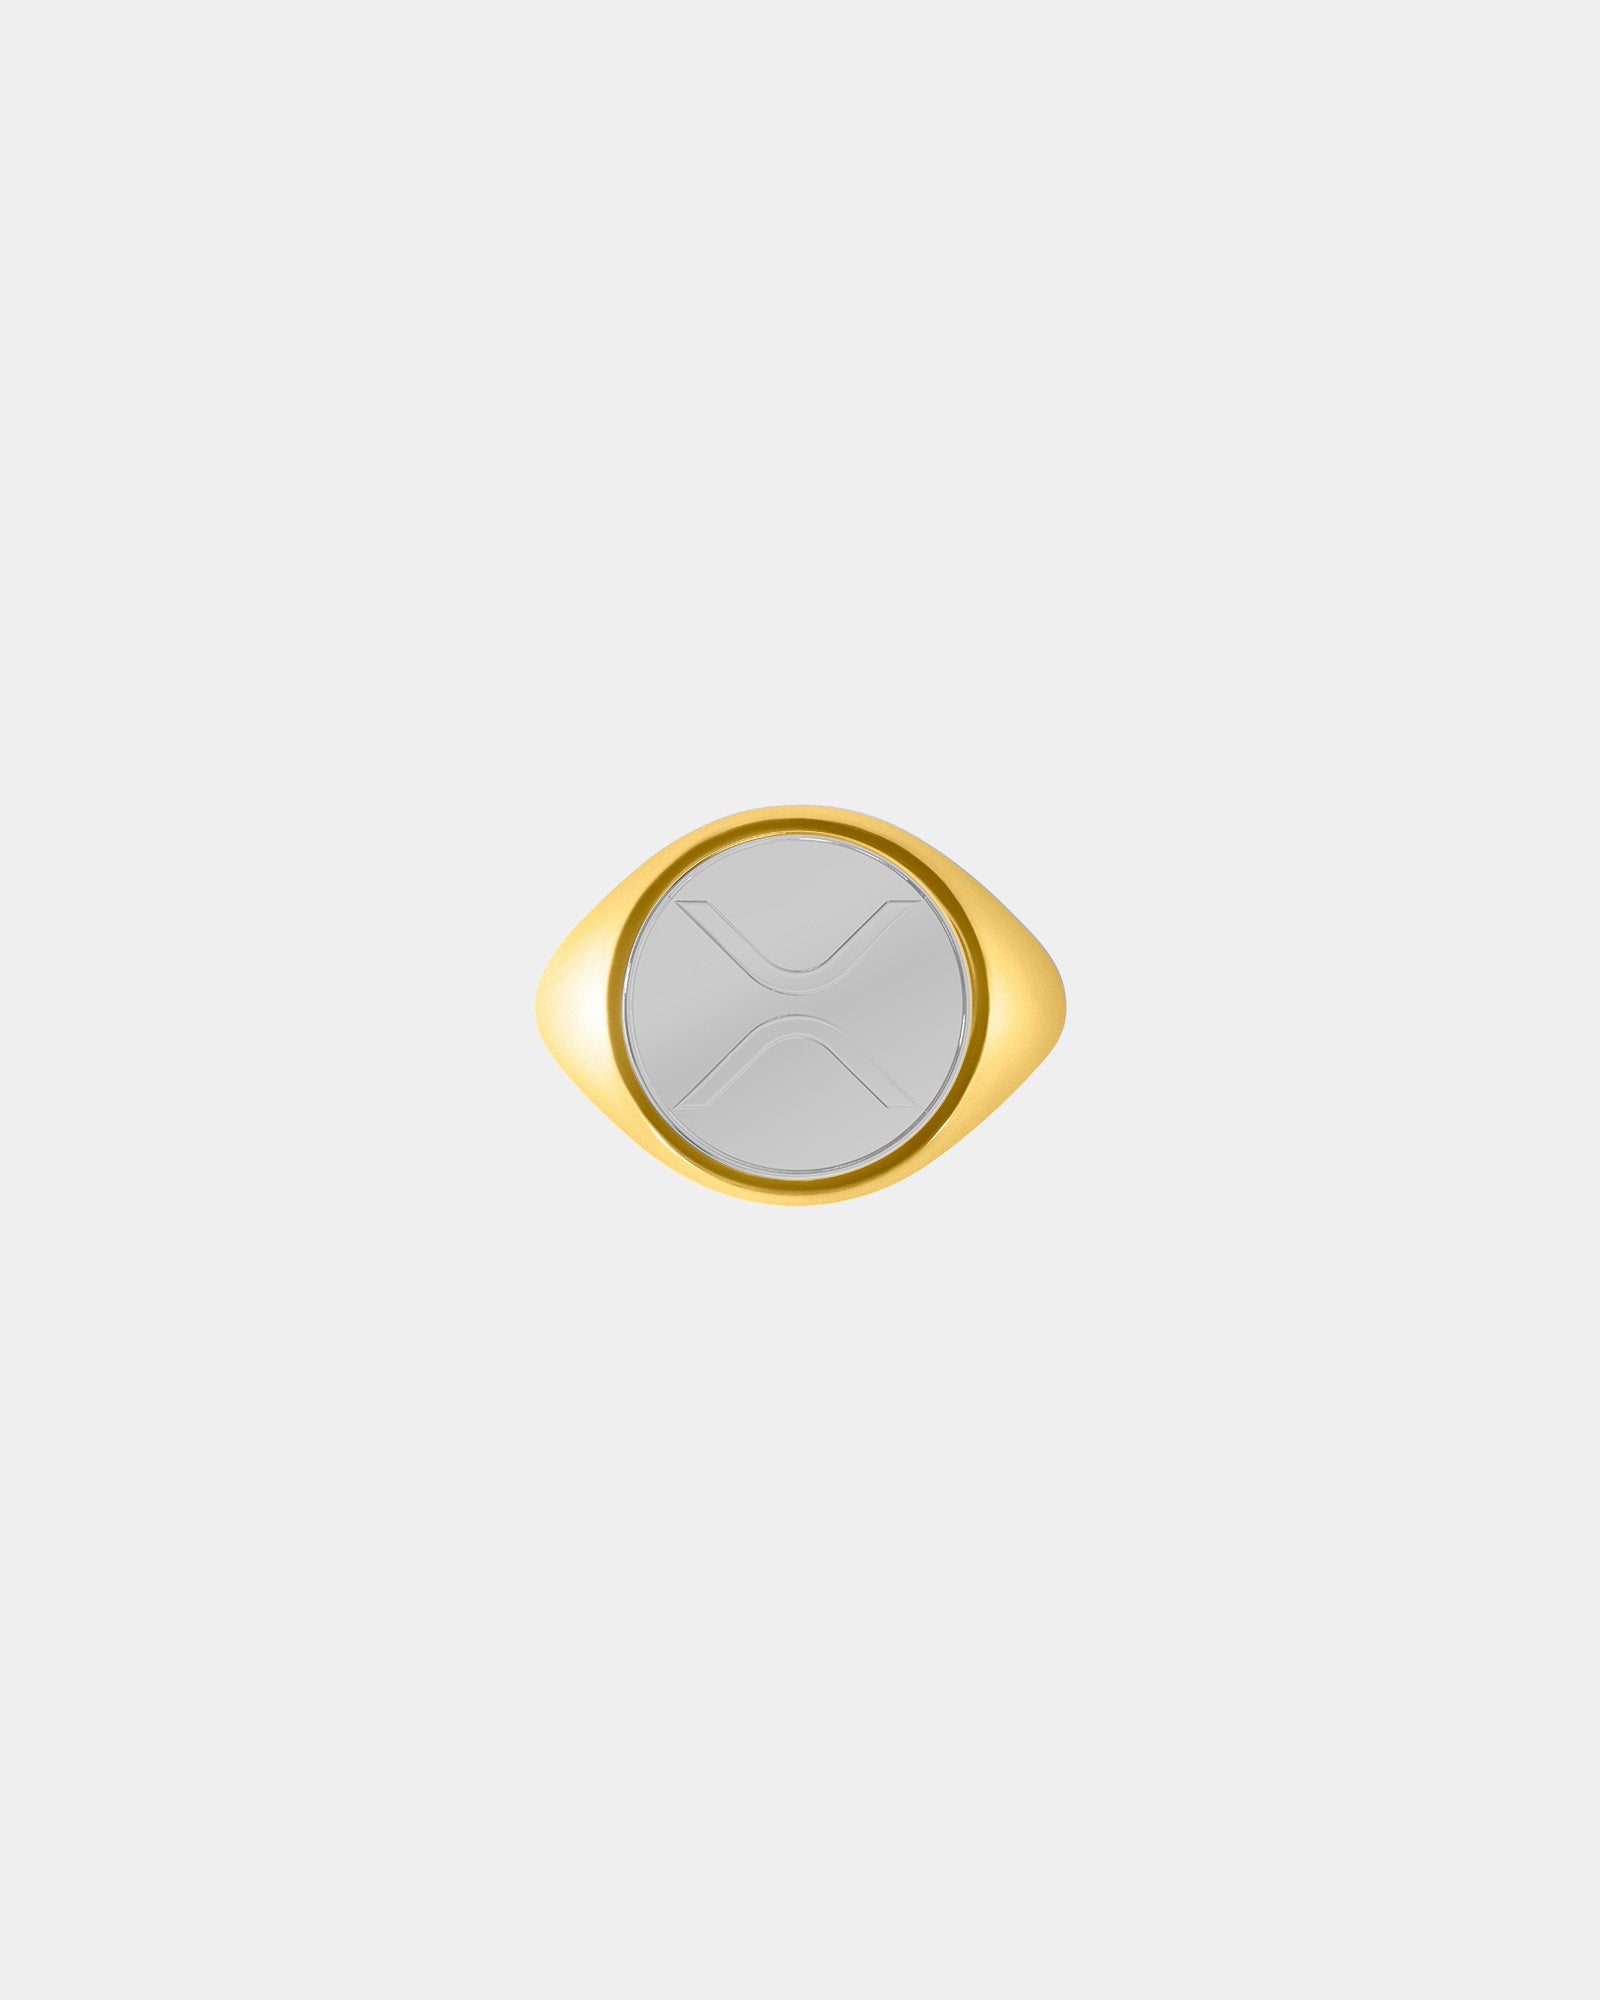 Large Ripple XRP Crypto Ring in 9k Yellow Gold / Sterling Silver by Wilson Grant